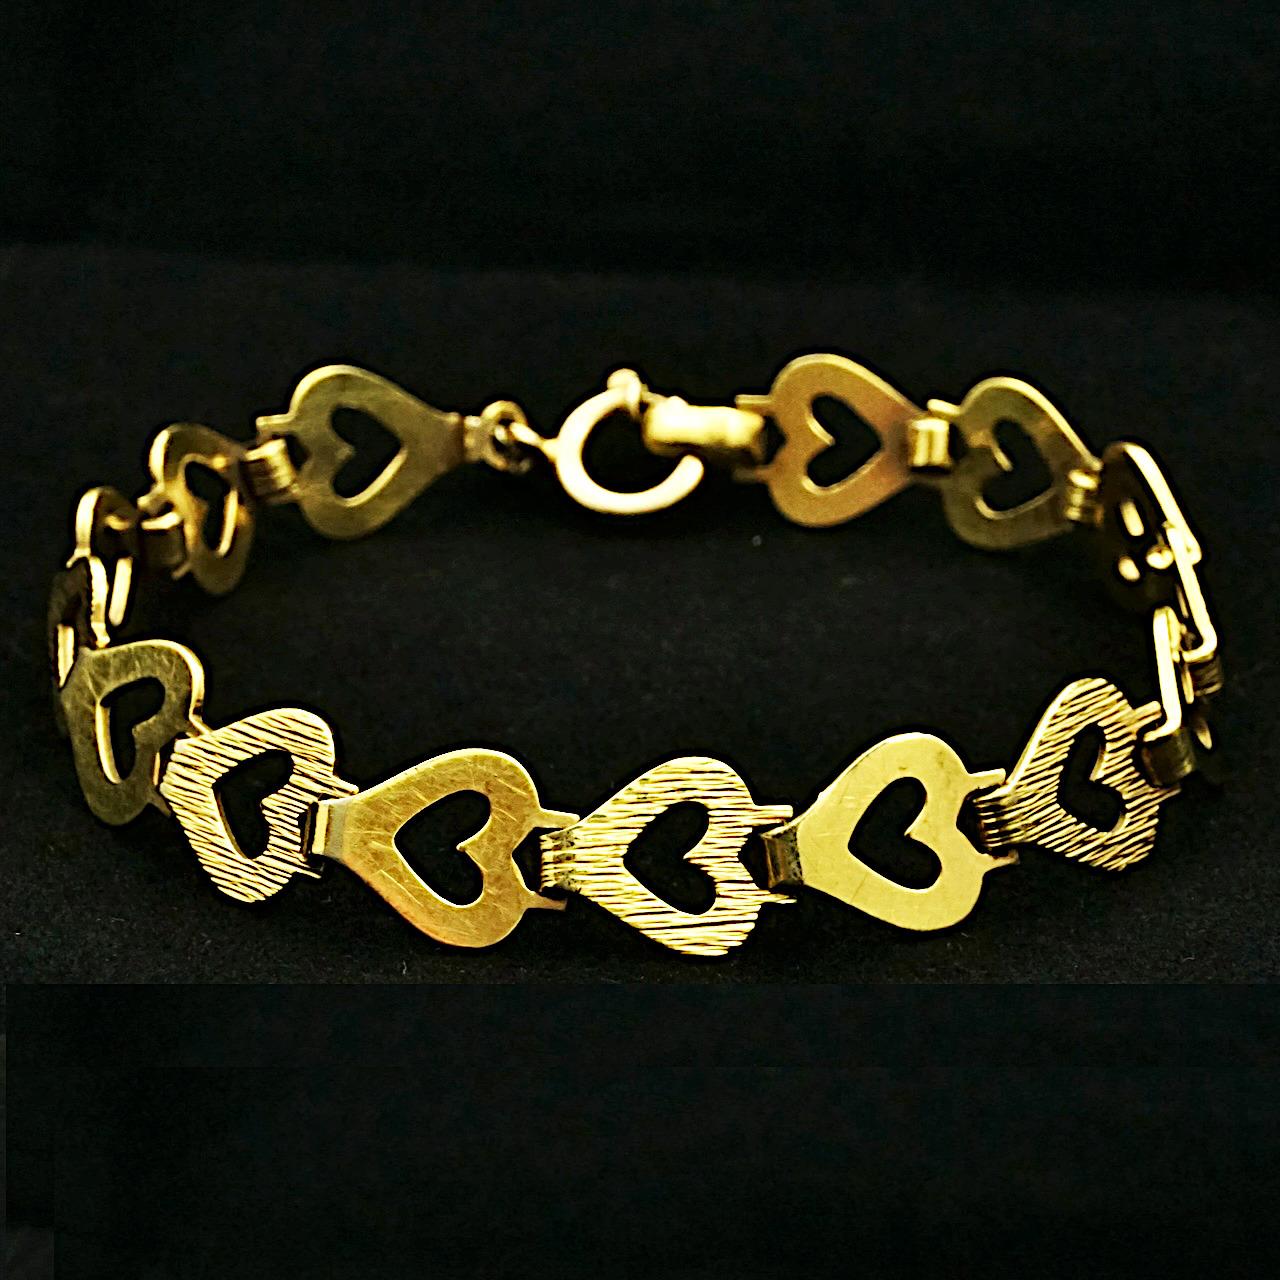 Andreas Daub Gold Plated Open Heart Textured and Shiny Link Bracelet For Sale 2